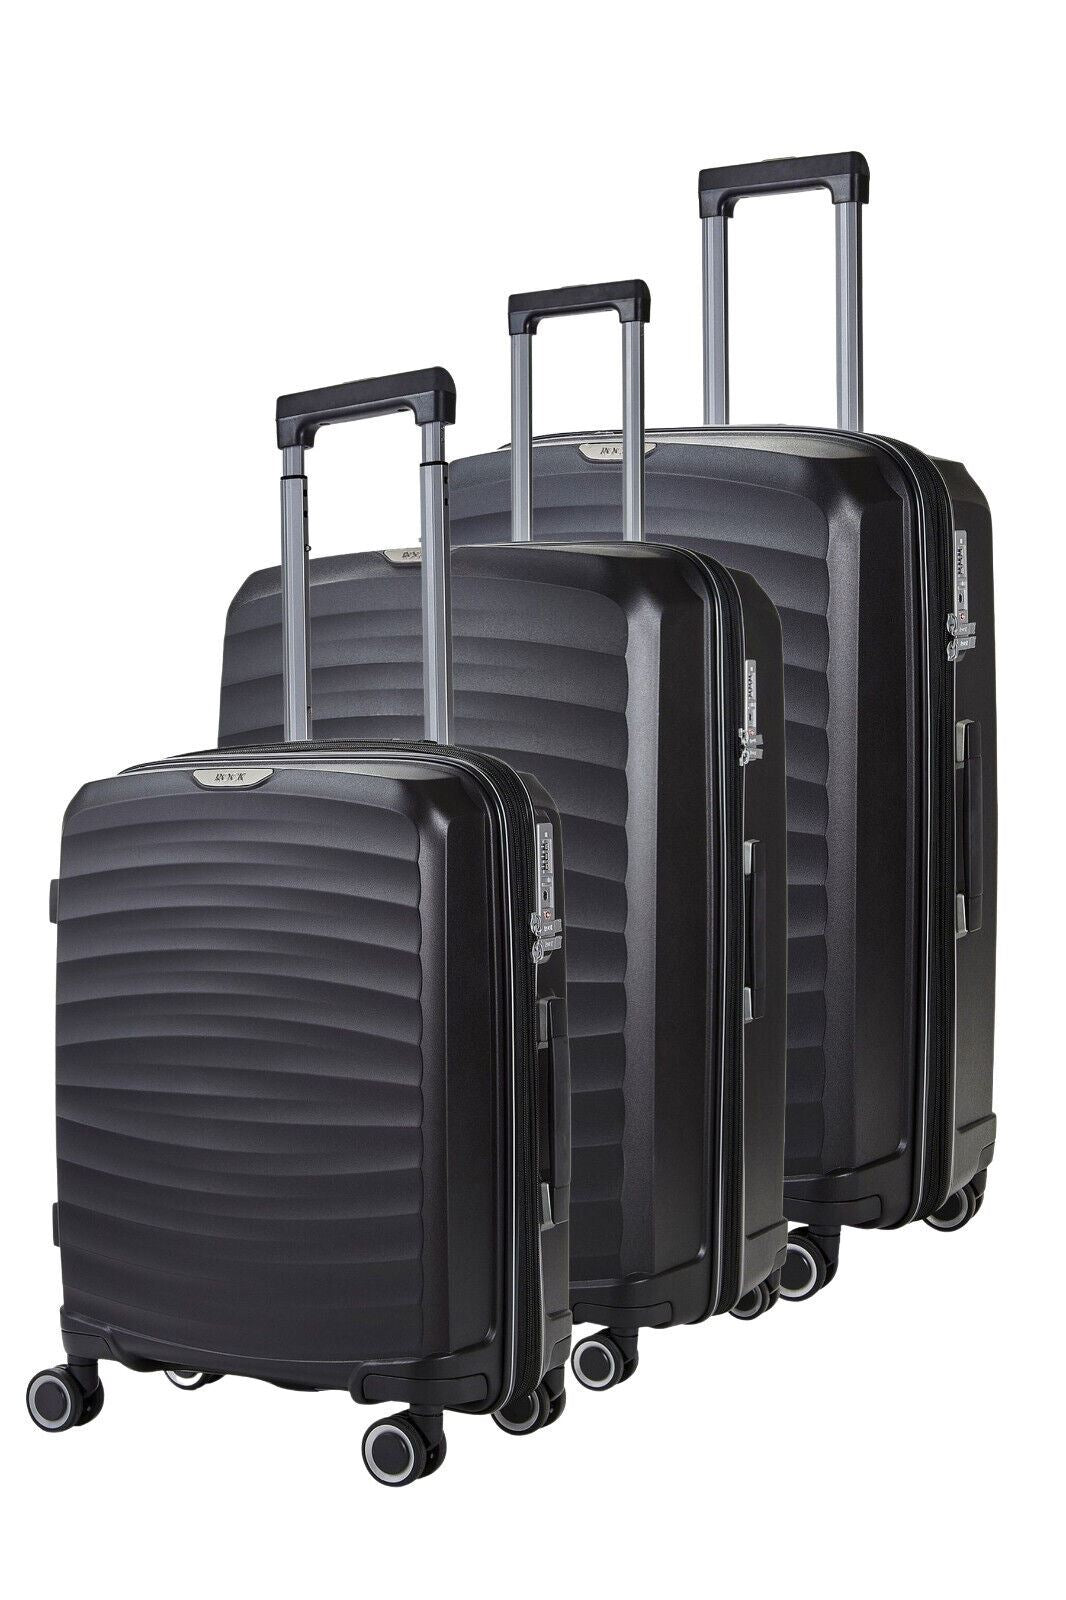 Altoona Set of 3 Hard Shell Suitcase in Black